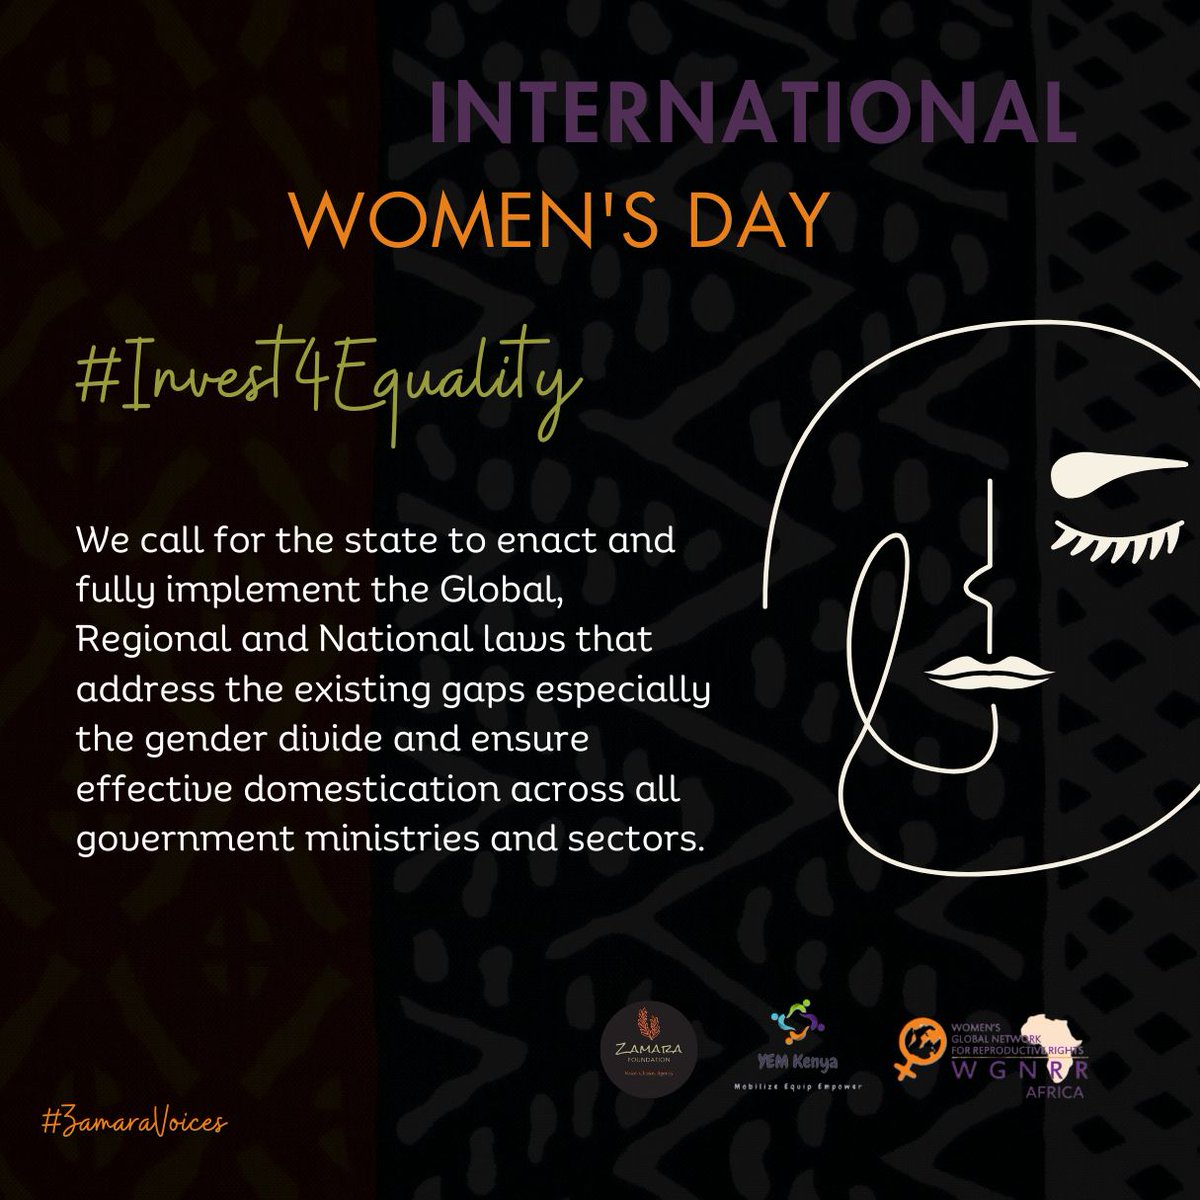 Let's not just take the initiative of talking about gender equality let's also gather the investment in it during IWD #invest4Equality
@Zamara_fdn 
@YEMKenya 
@wgnrr_africa